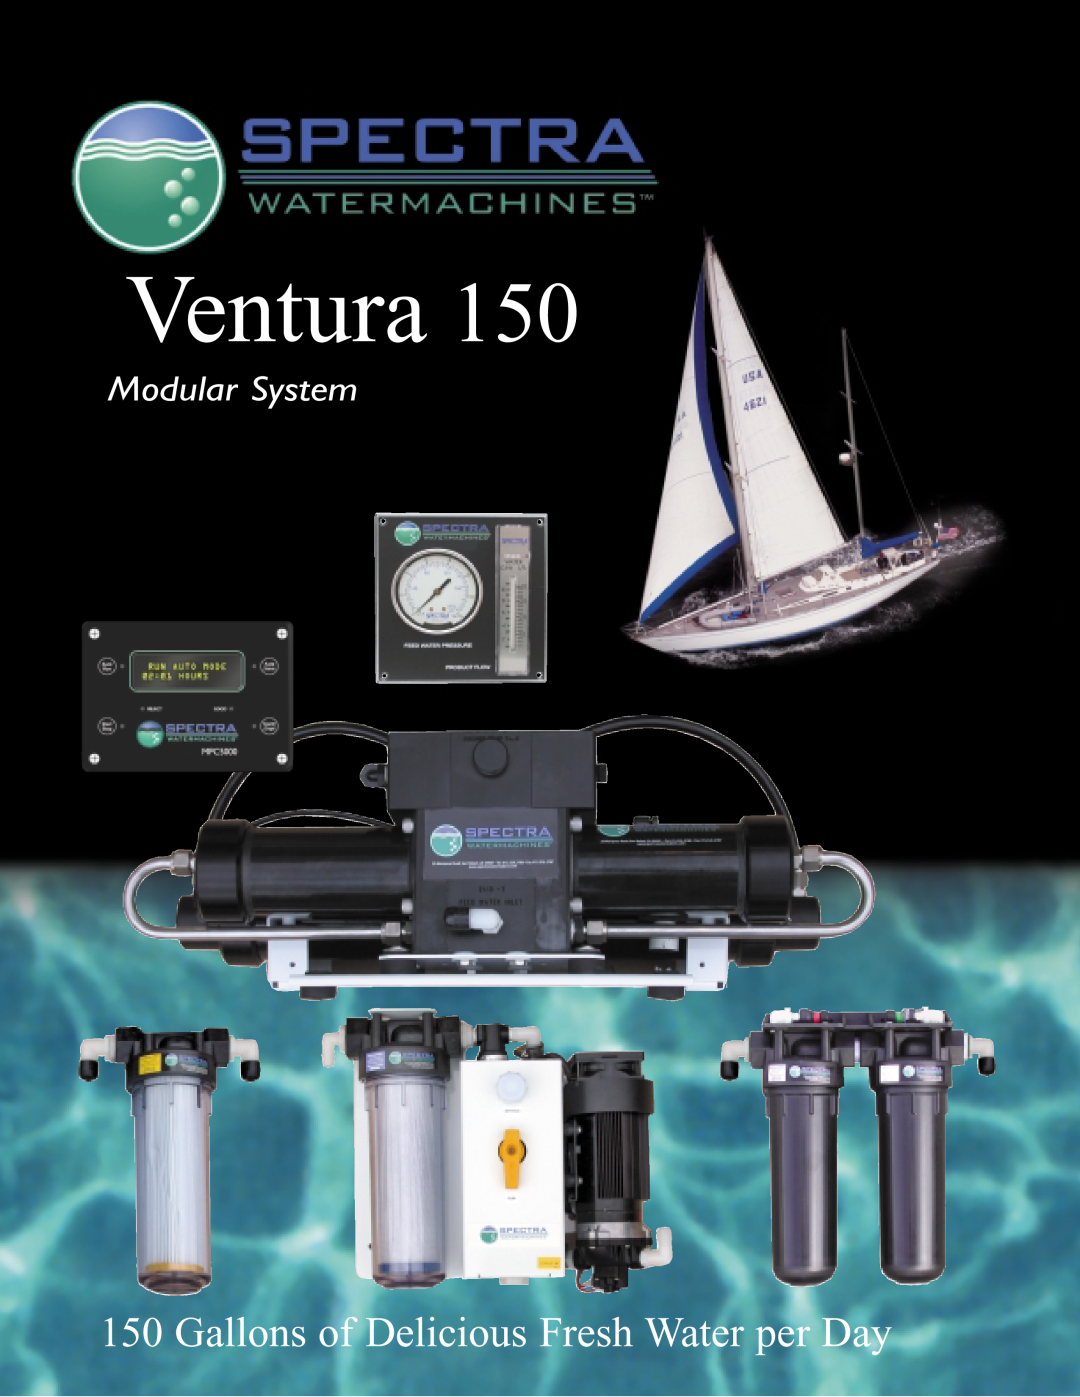 Spectra Watermakers 150 manual Ventura, Gallons of Delicious Fresh Water per Day, Modular System 